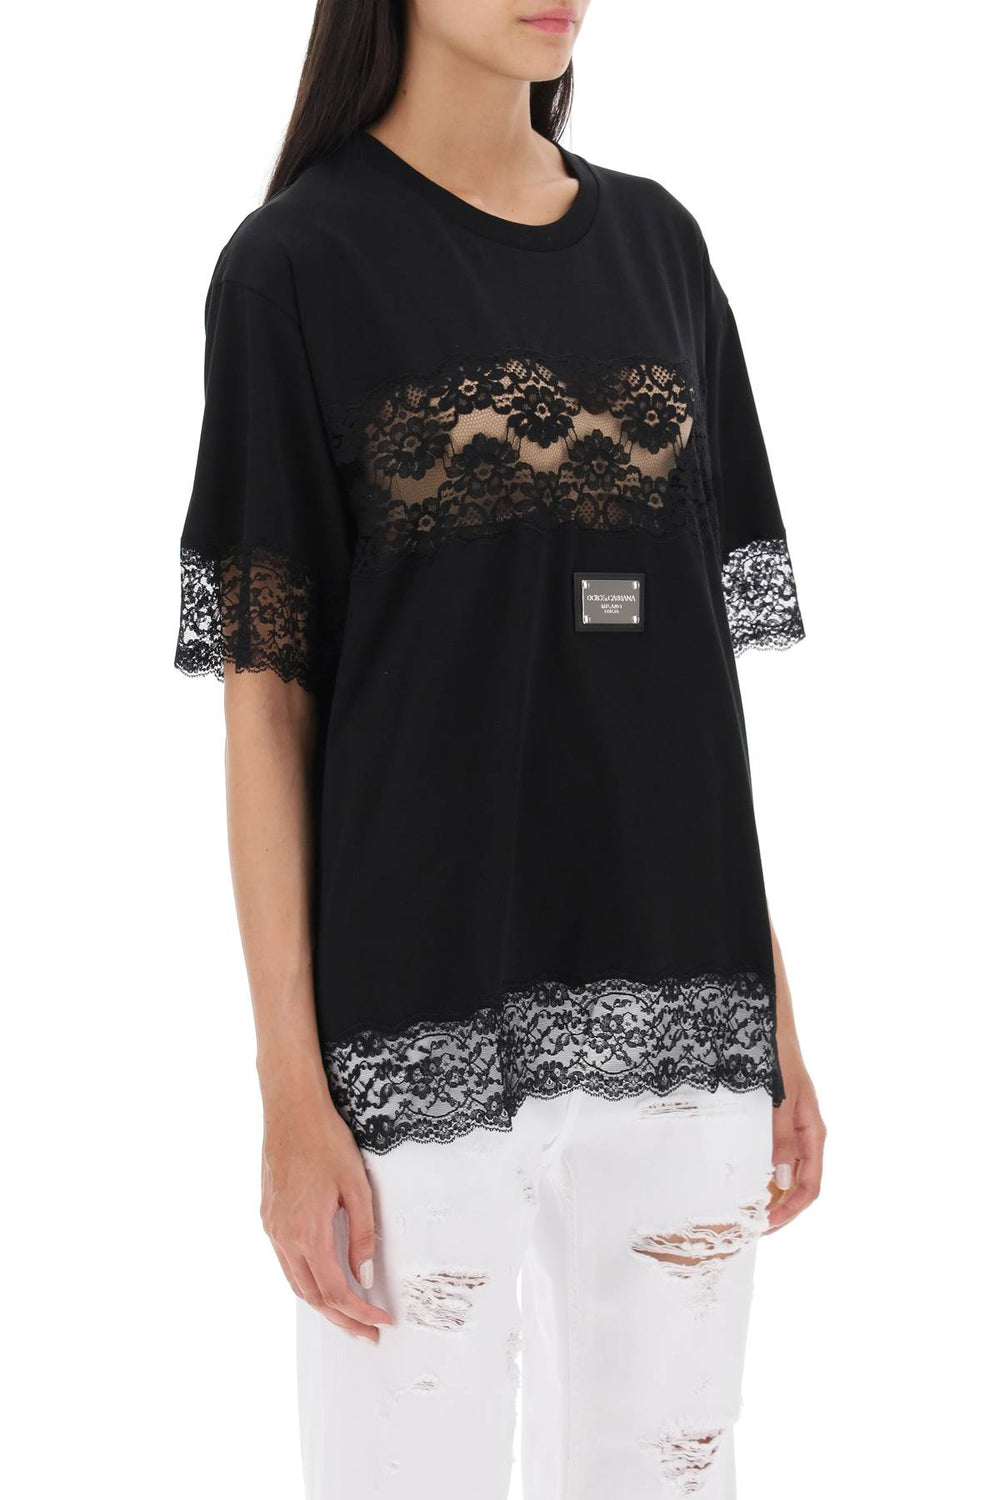 Dolce & gabbana t-shirt with lace inserts-1